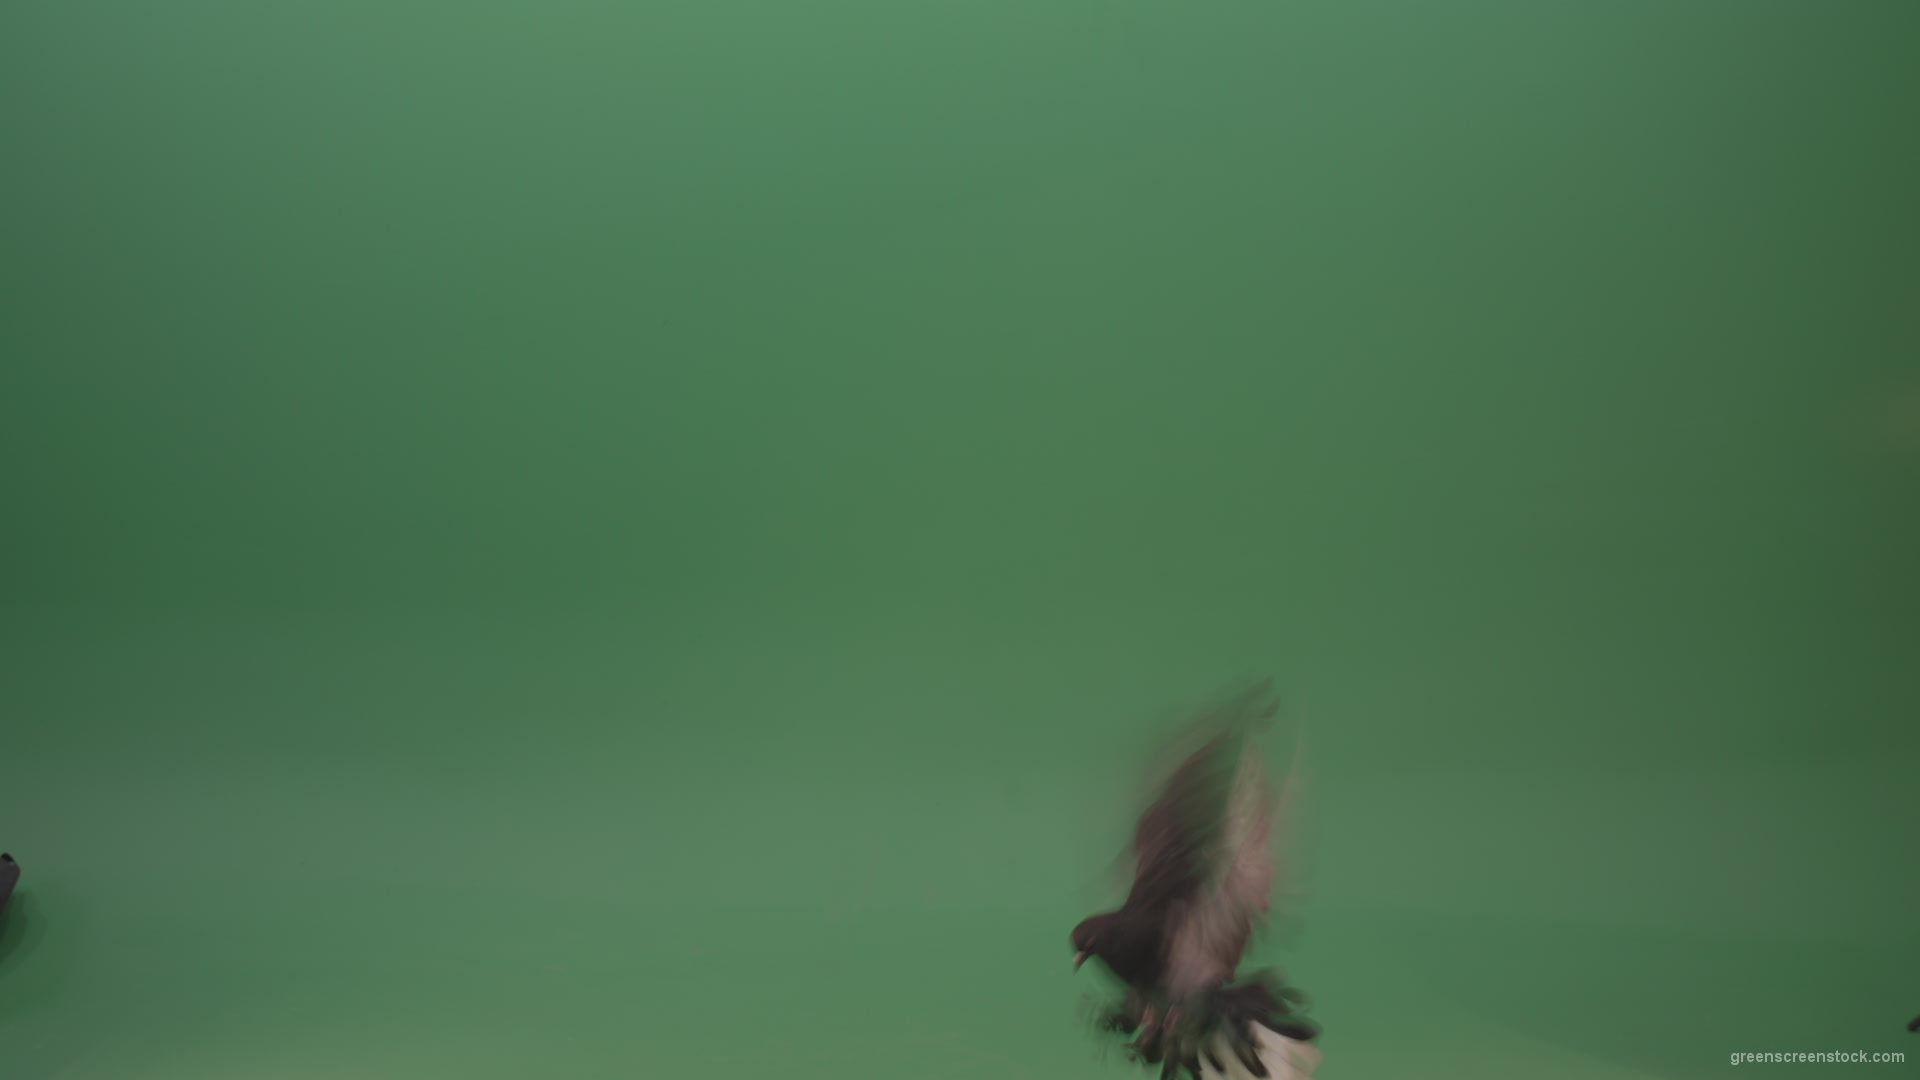 Raft-of-a-gray-pigeon-in-a-circle-of-landing-isolated-on-green-screen_007 Green Screen Stock